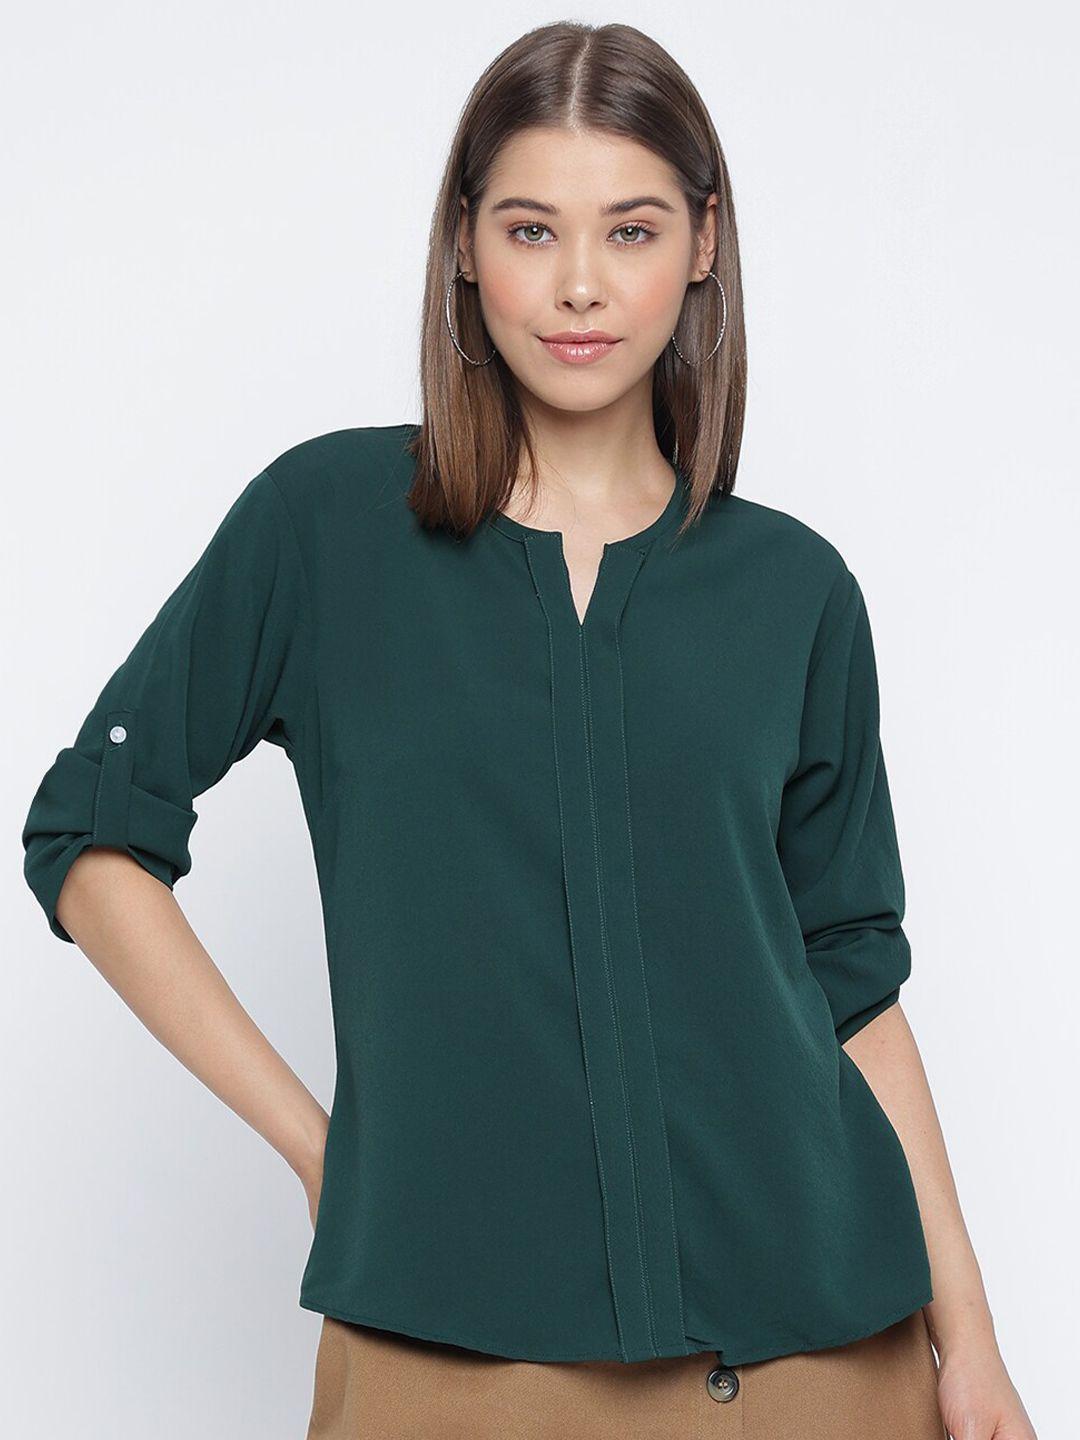 mayra roll-up sleeves crepe styled back top